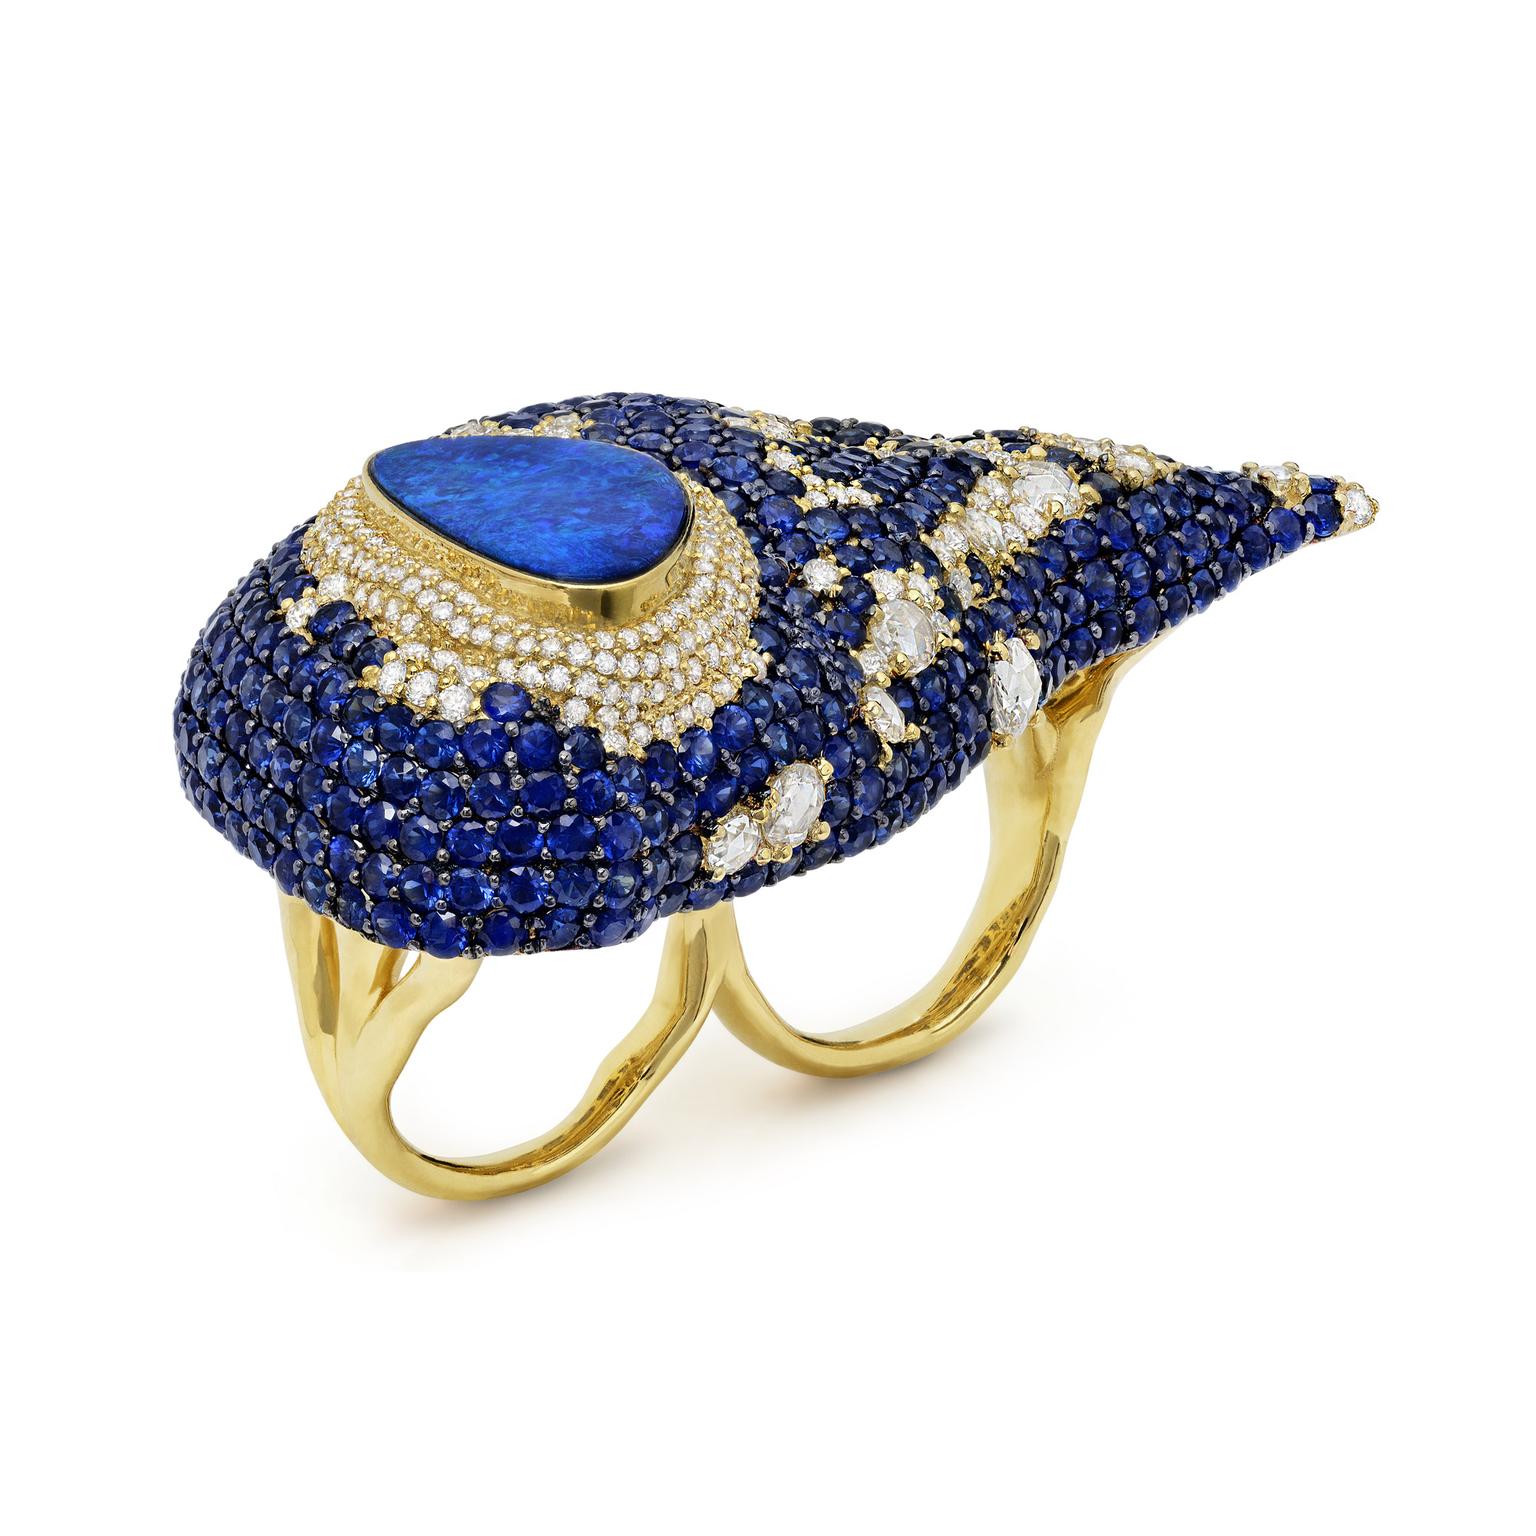 Michael John opal and sapphire two-finger ring